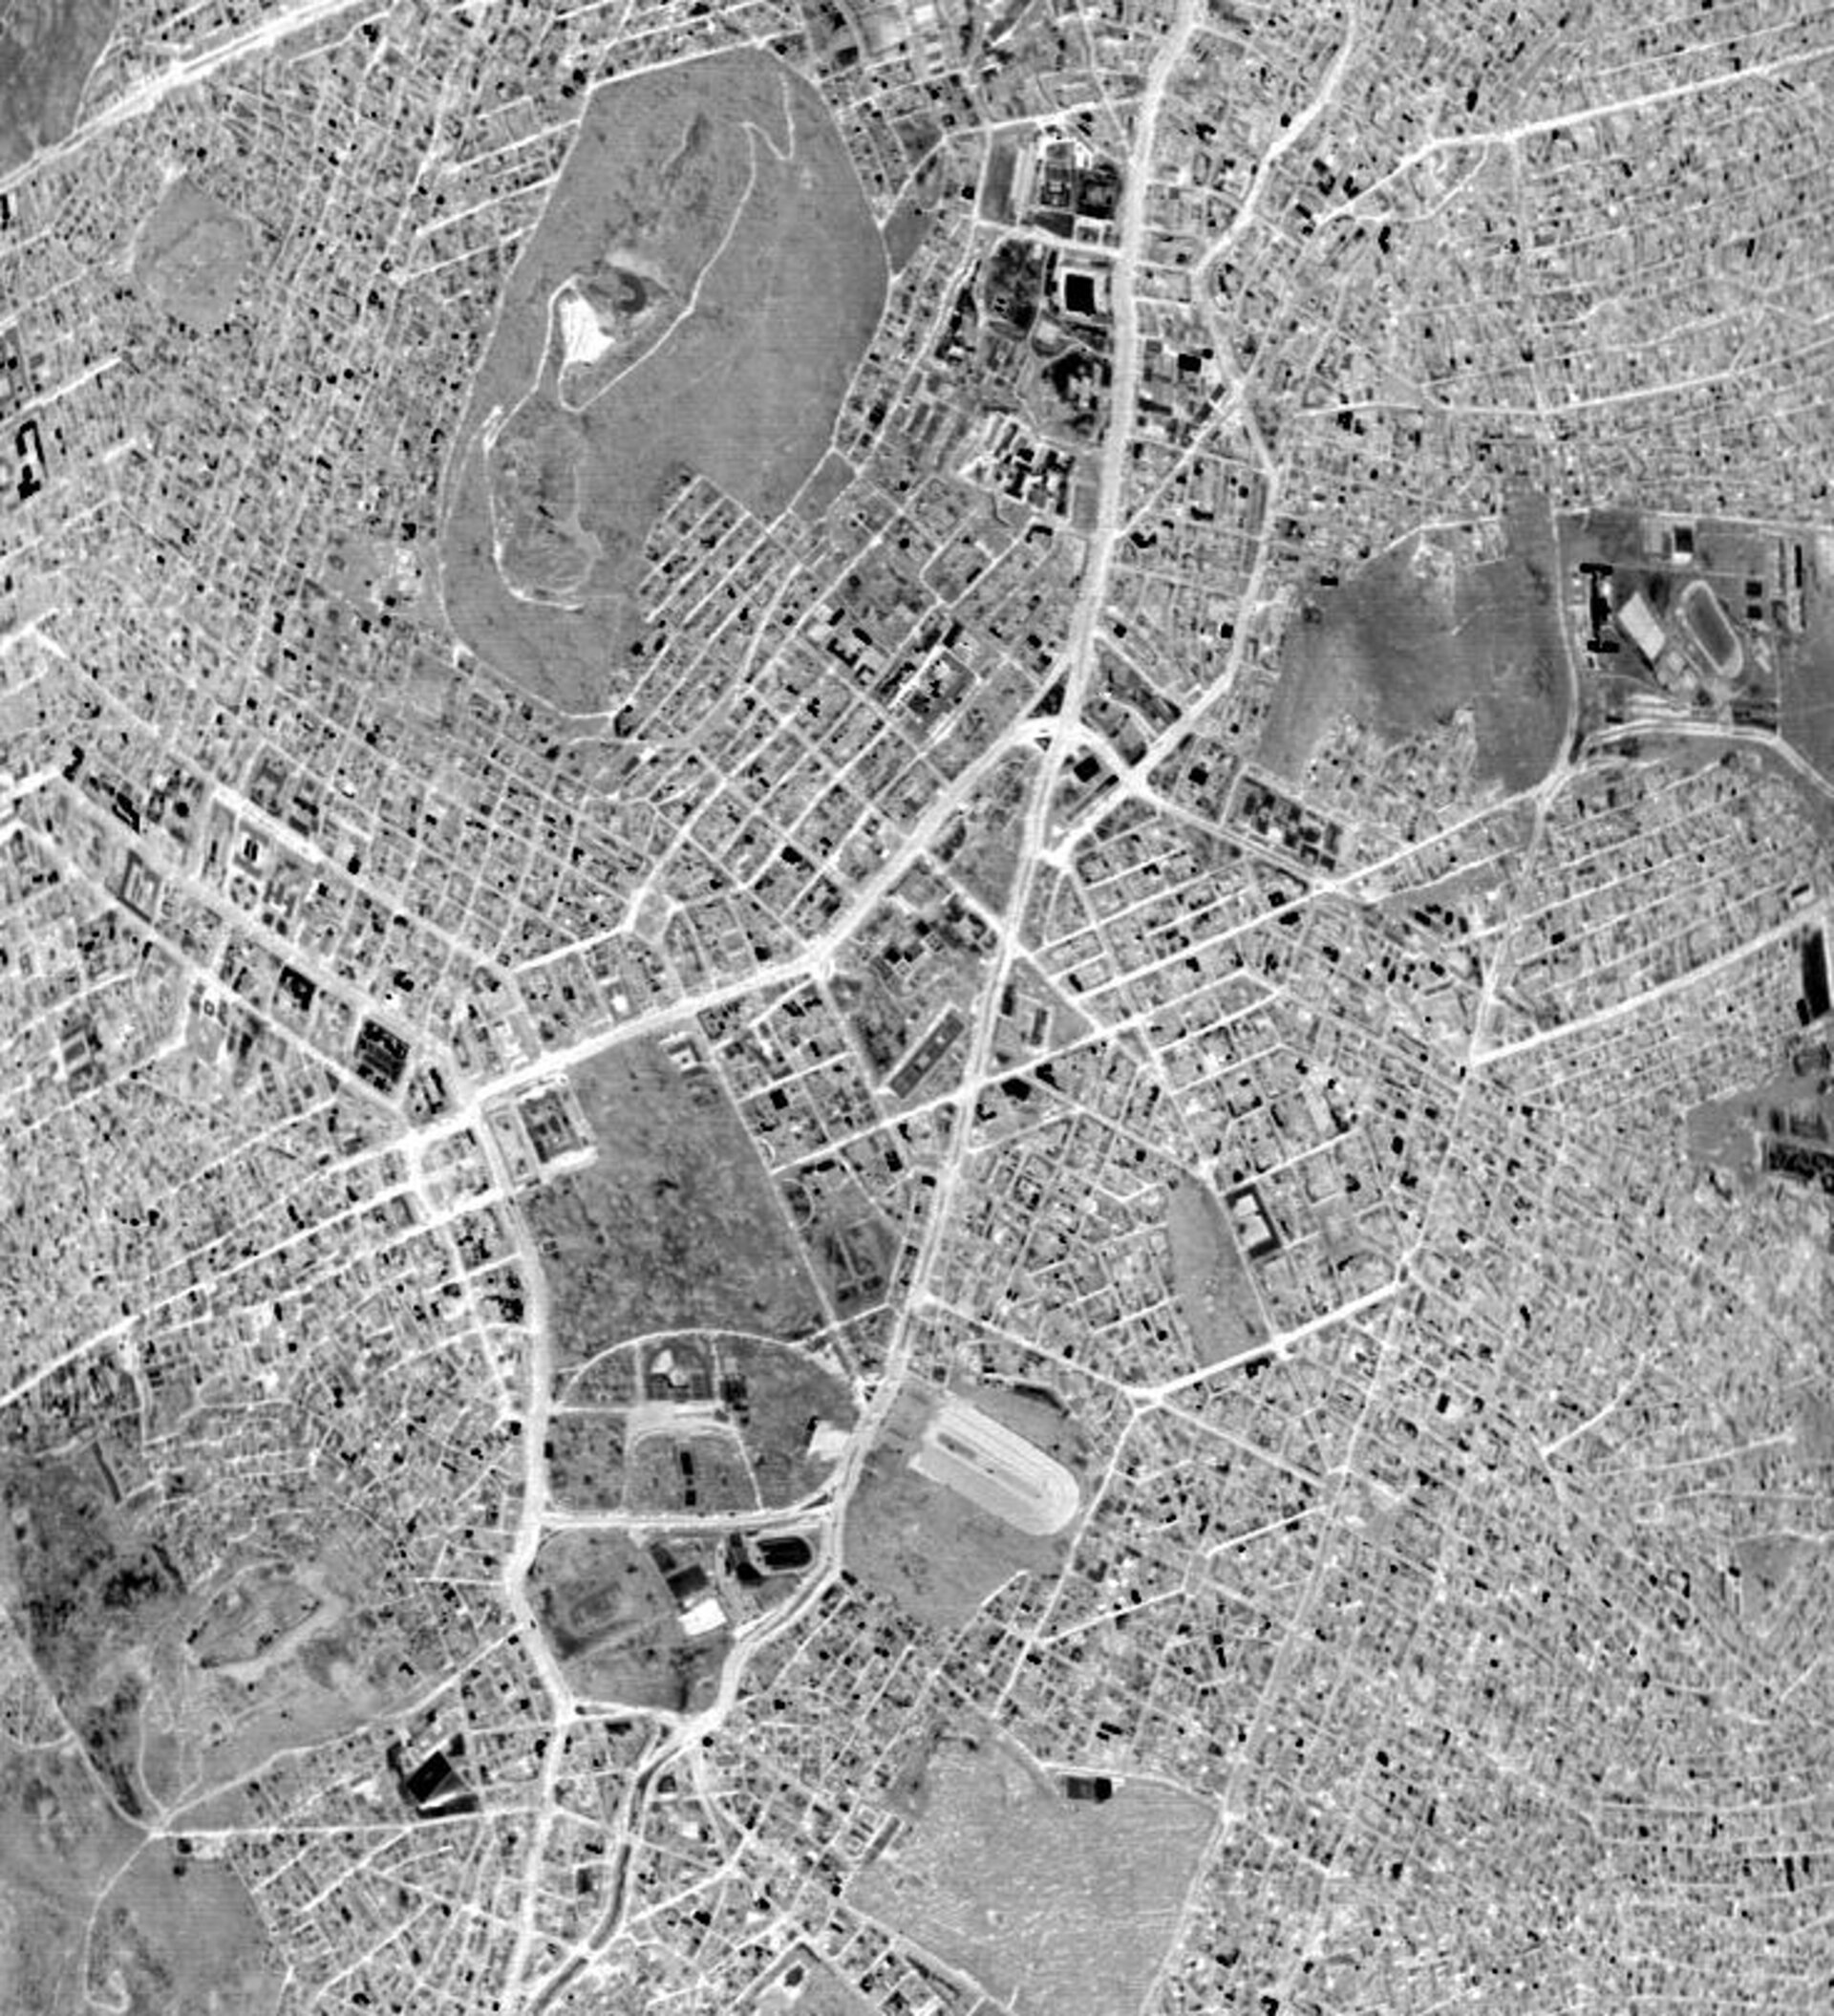 Thermal image of Athens